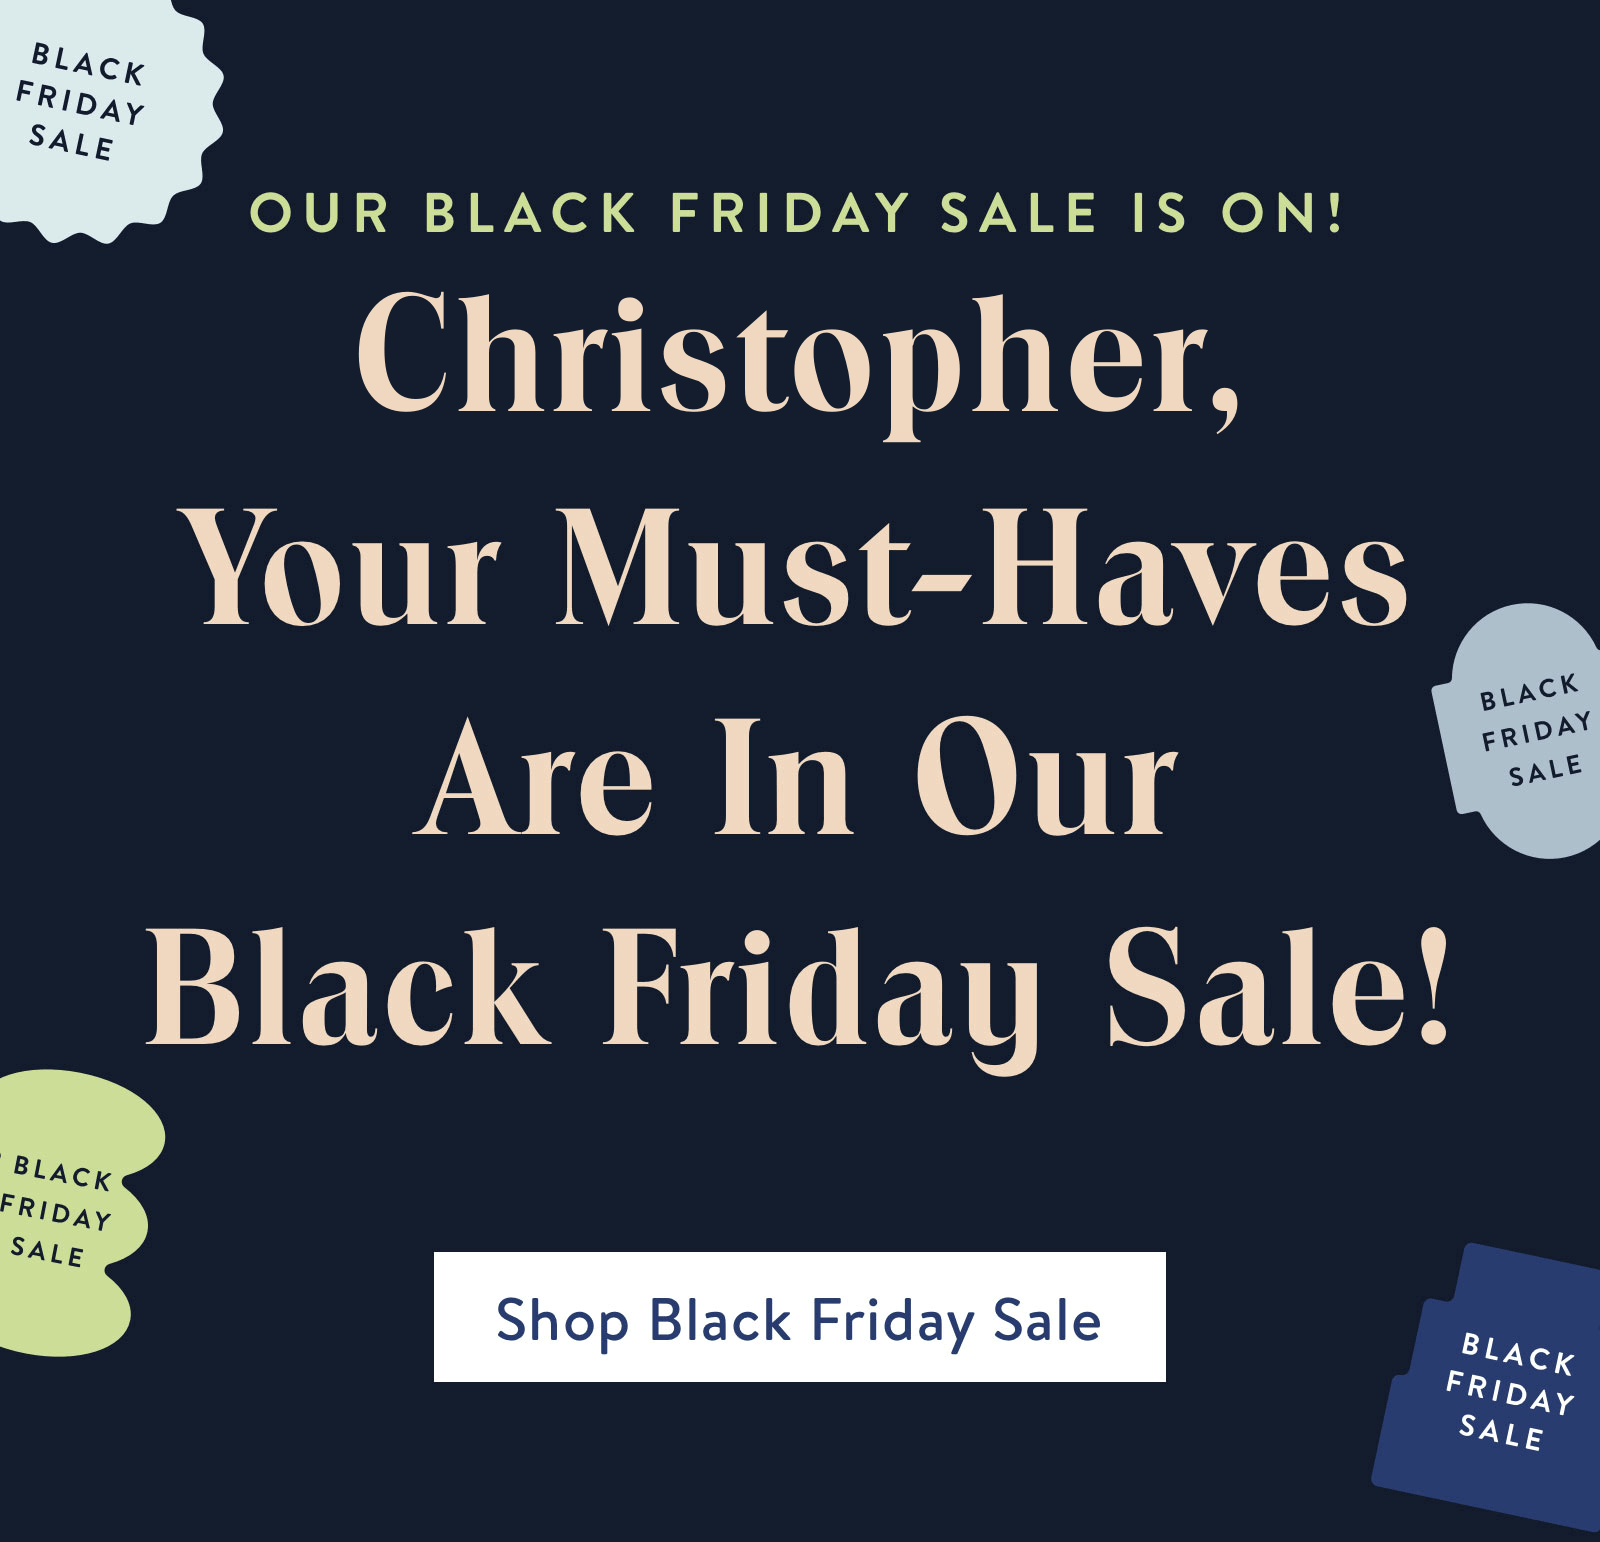 Hey there, your must-haves are in our Black Friday sale